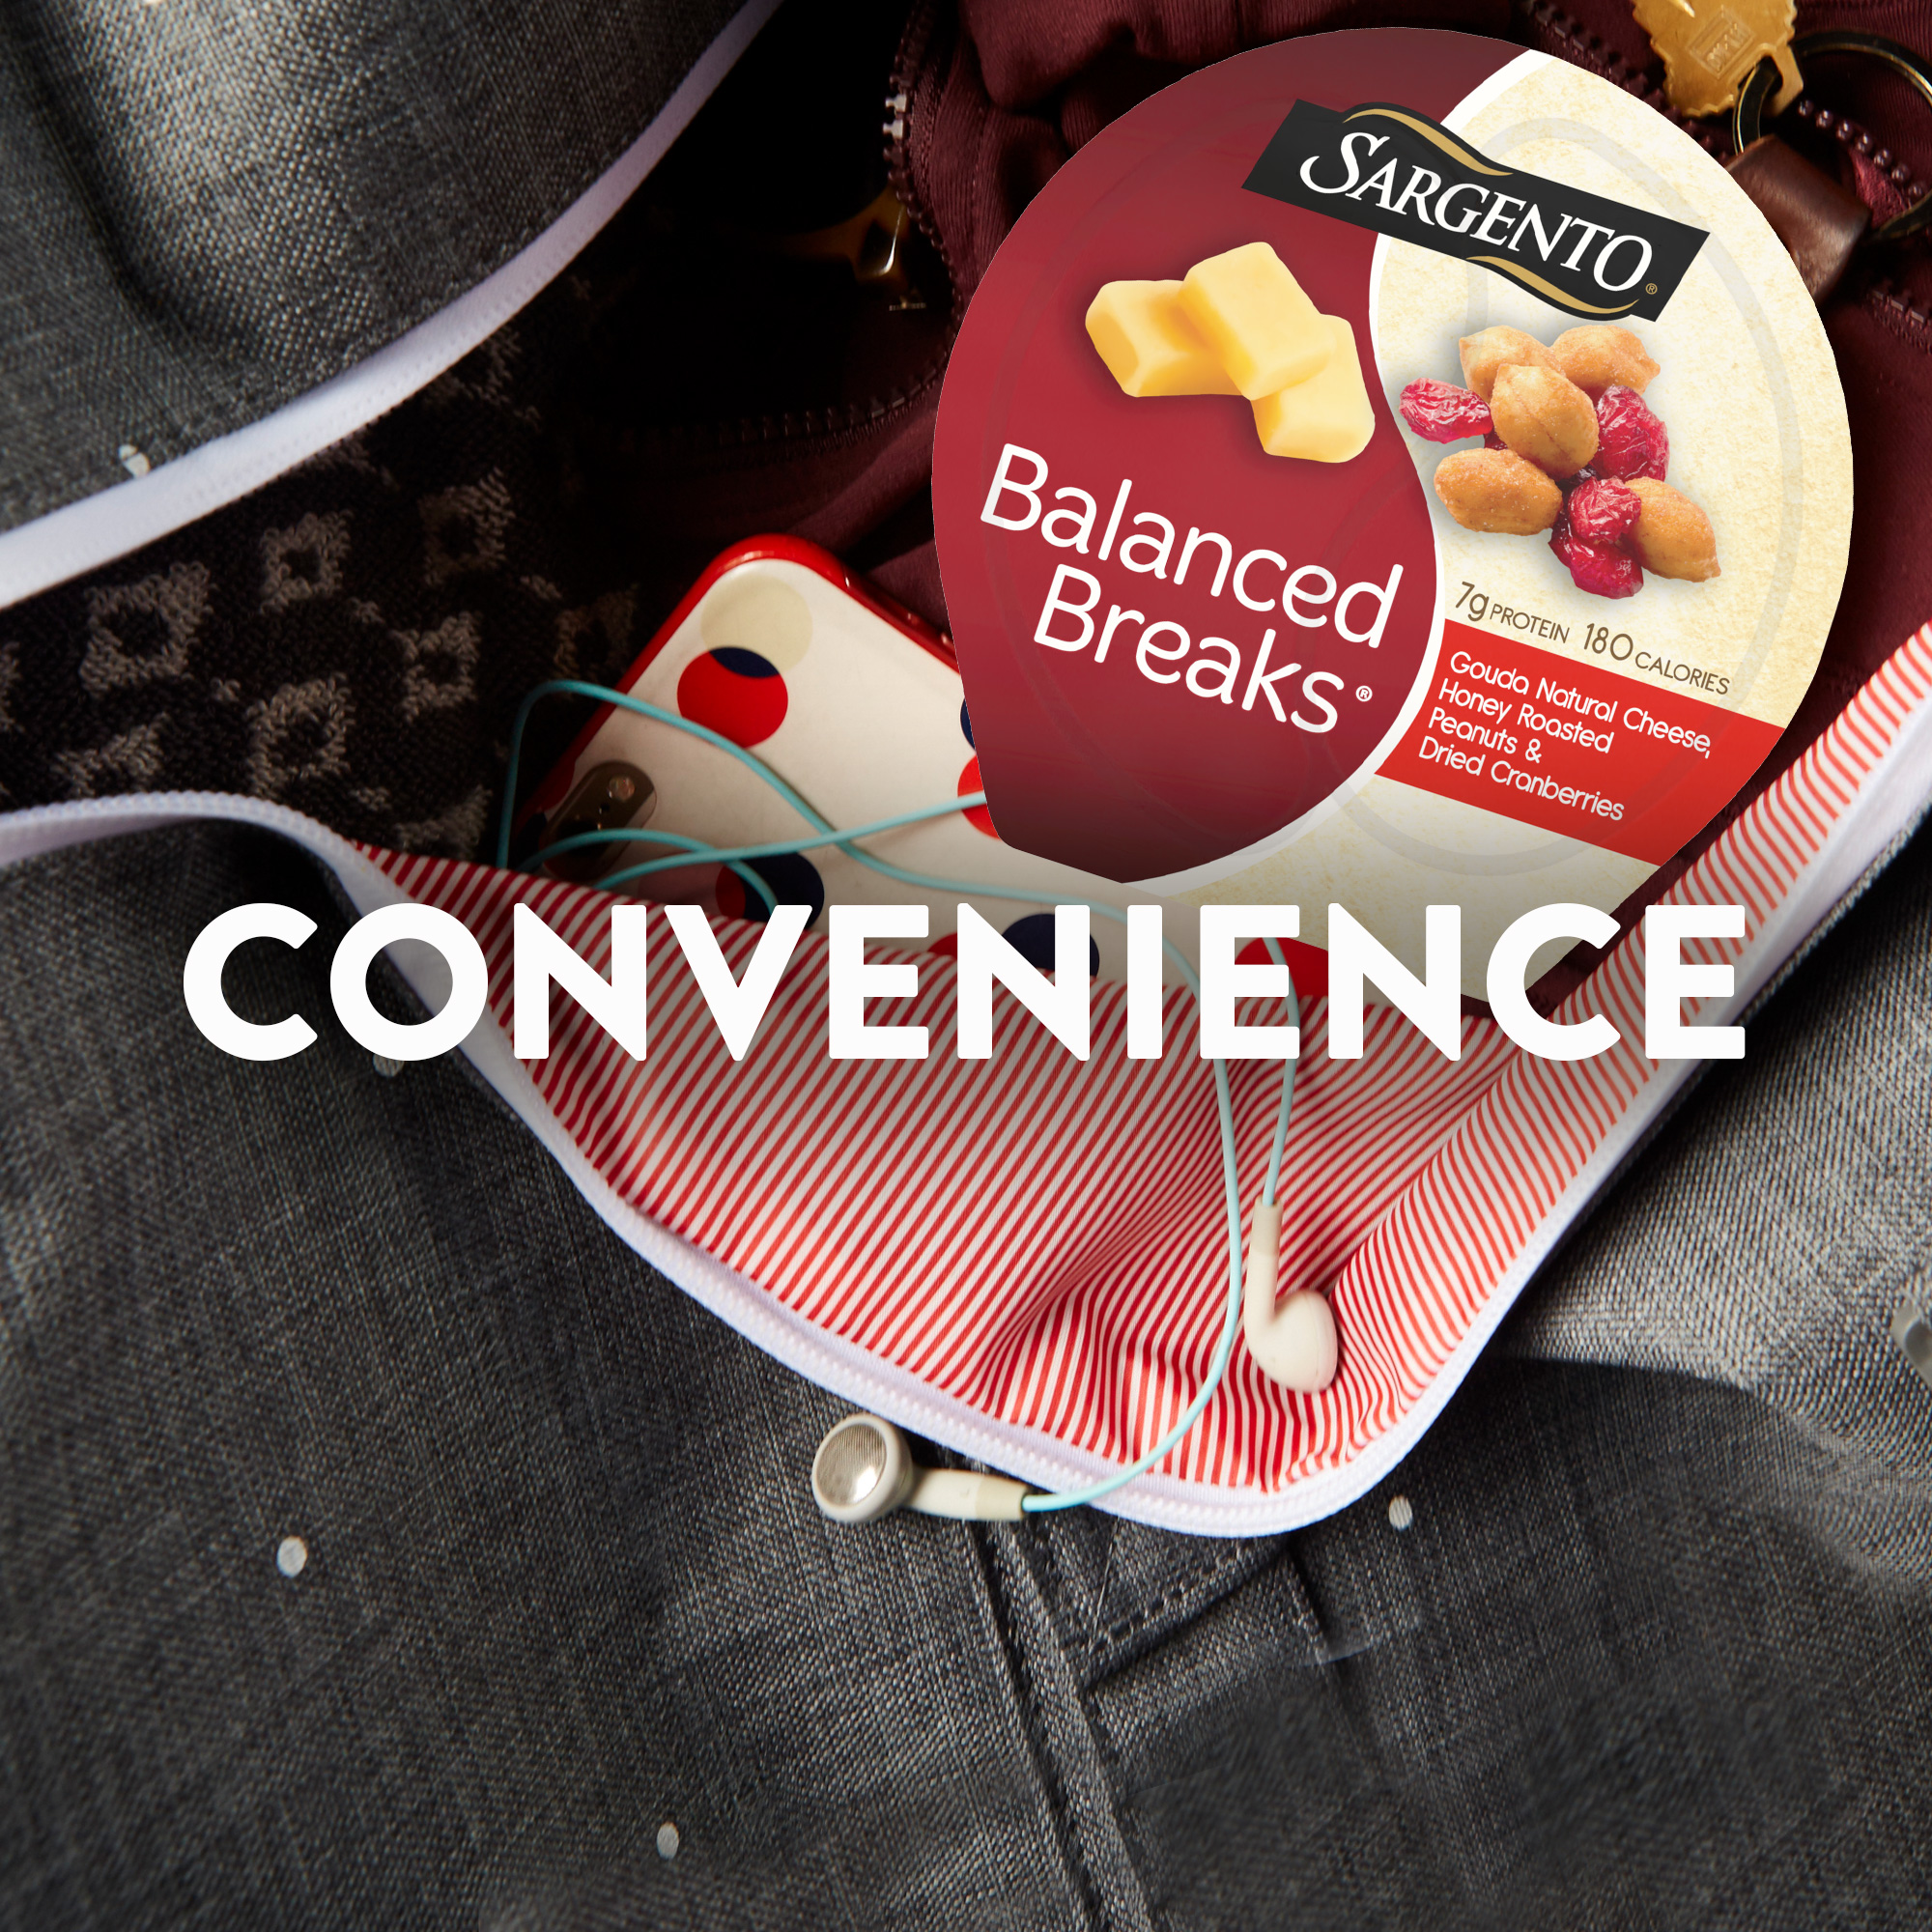 Sargento® Balanced Breaks®, Gouda Natural Cheese, Honey Roasted Peanuts and Dried Cranberries